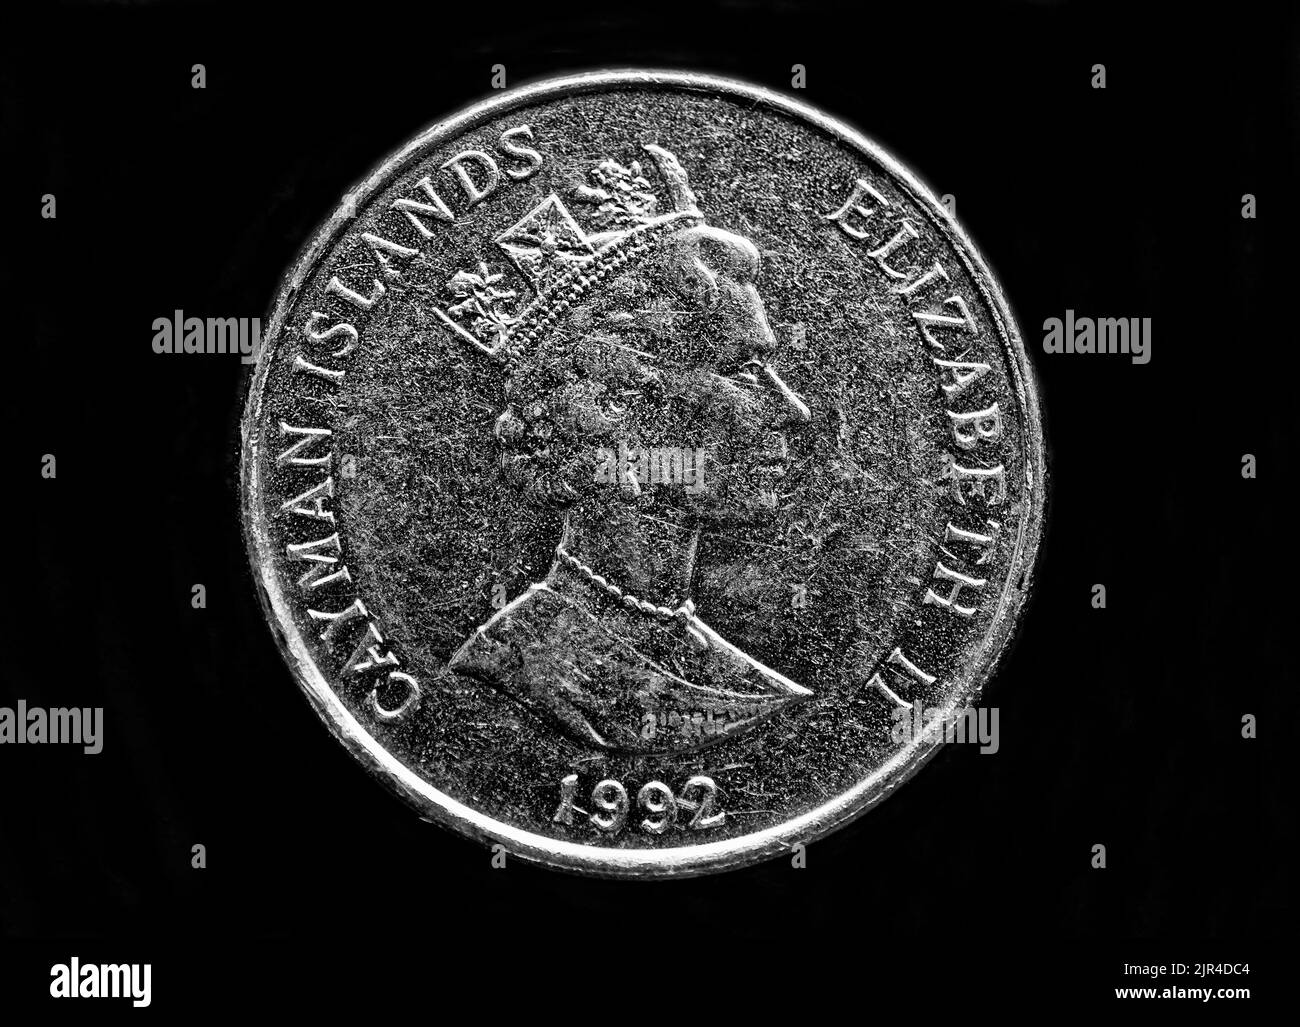 Ship coins Black and White Stock Photos & Images - Alamy